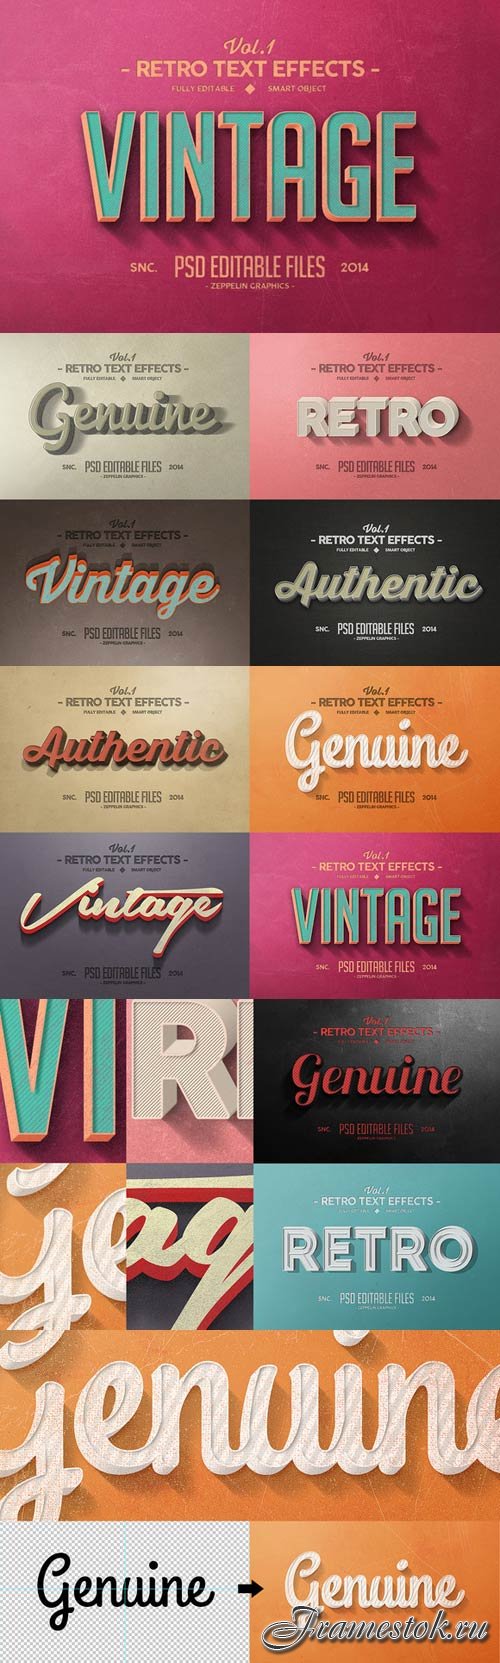 Vintage Text Effects Vol.1